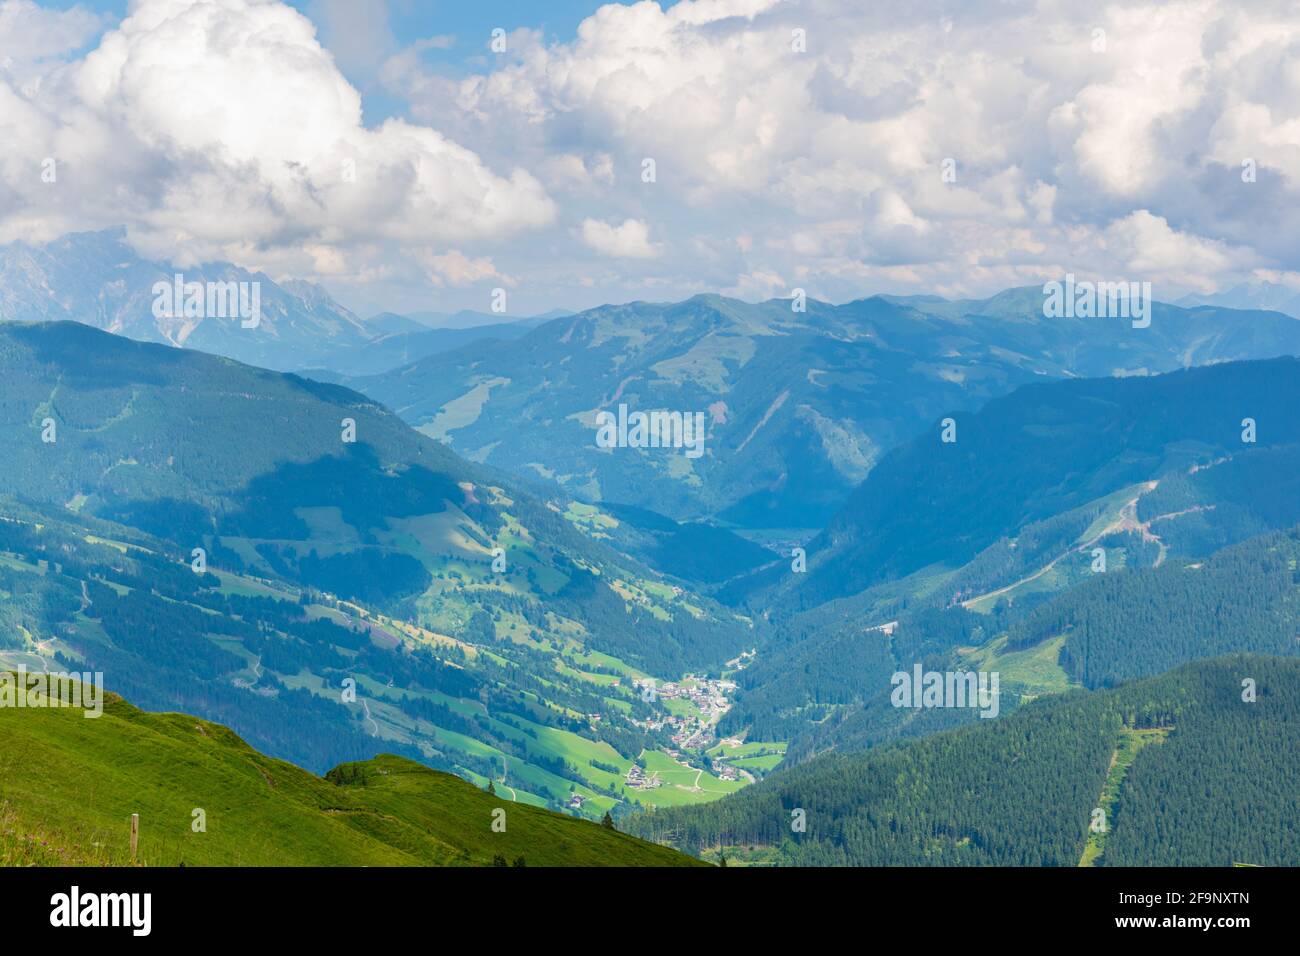 View of the the famous hiking trail Pinzgauer spaziergang in the alps near Zell am See, Salzburg region, Austria. Stock Photo